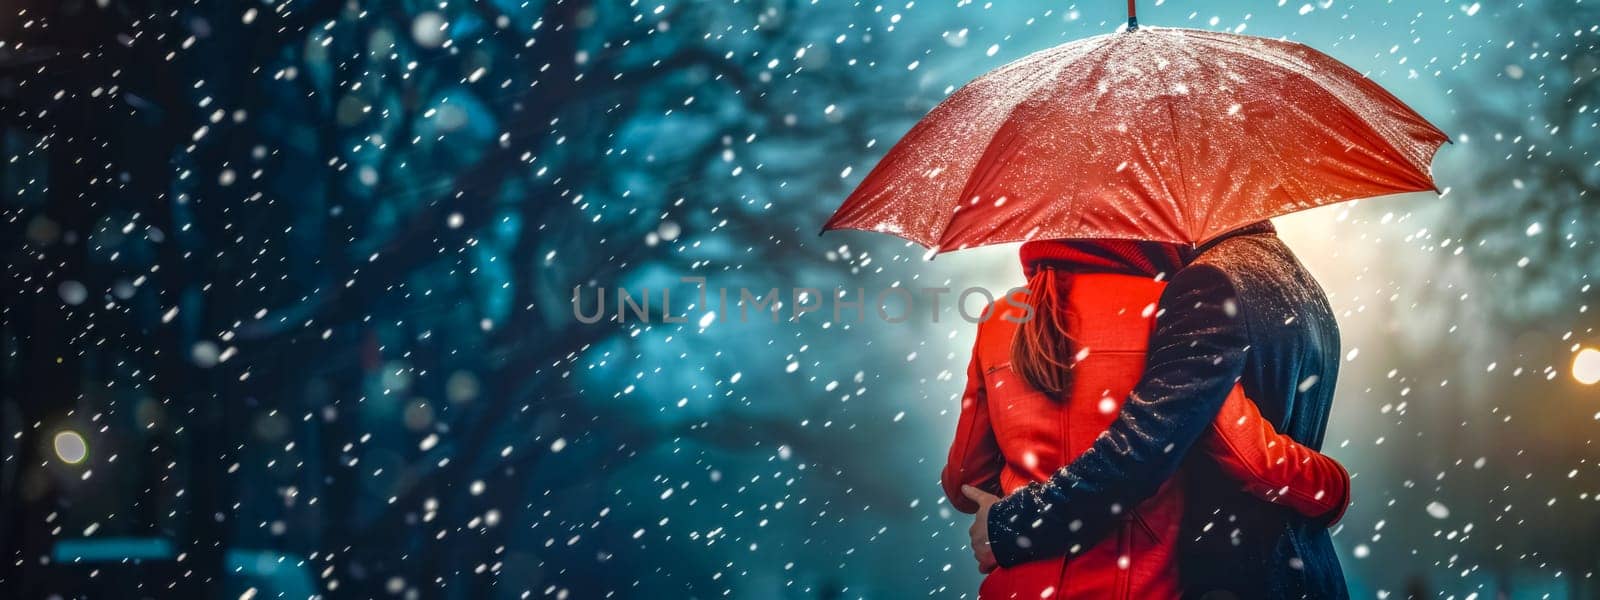 Winter embrace under a red umbrella by Edophoto